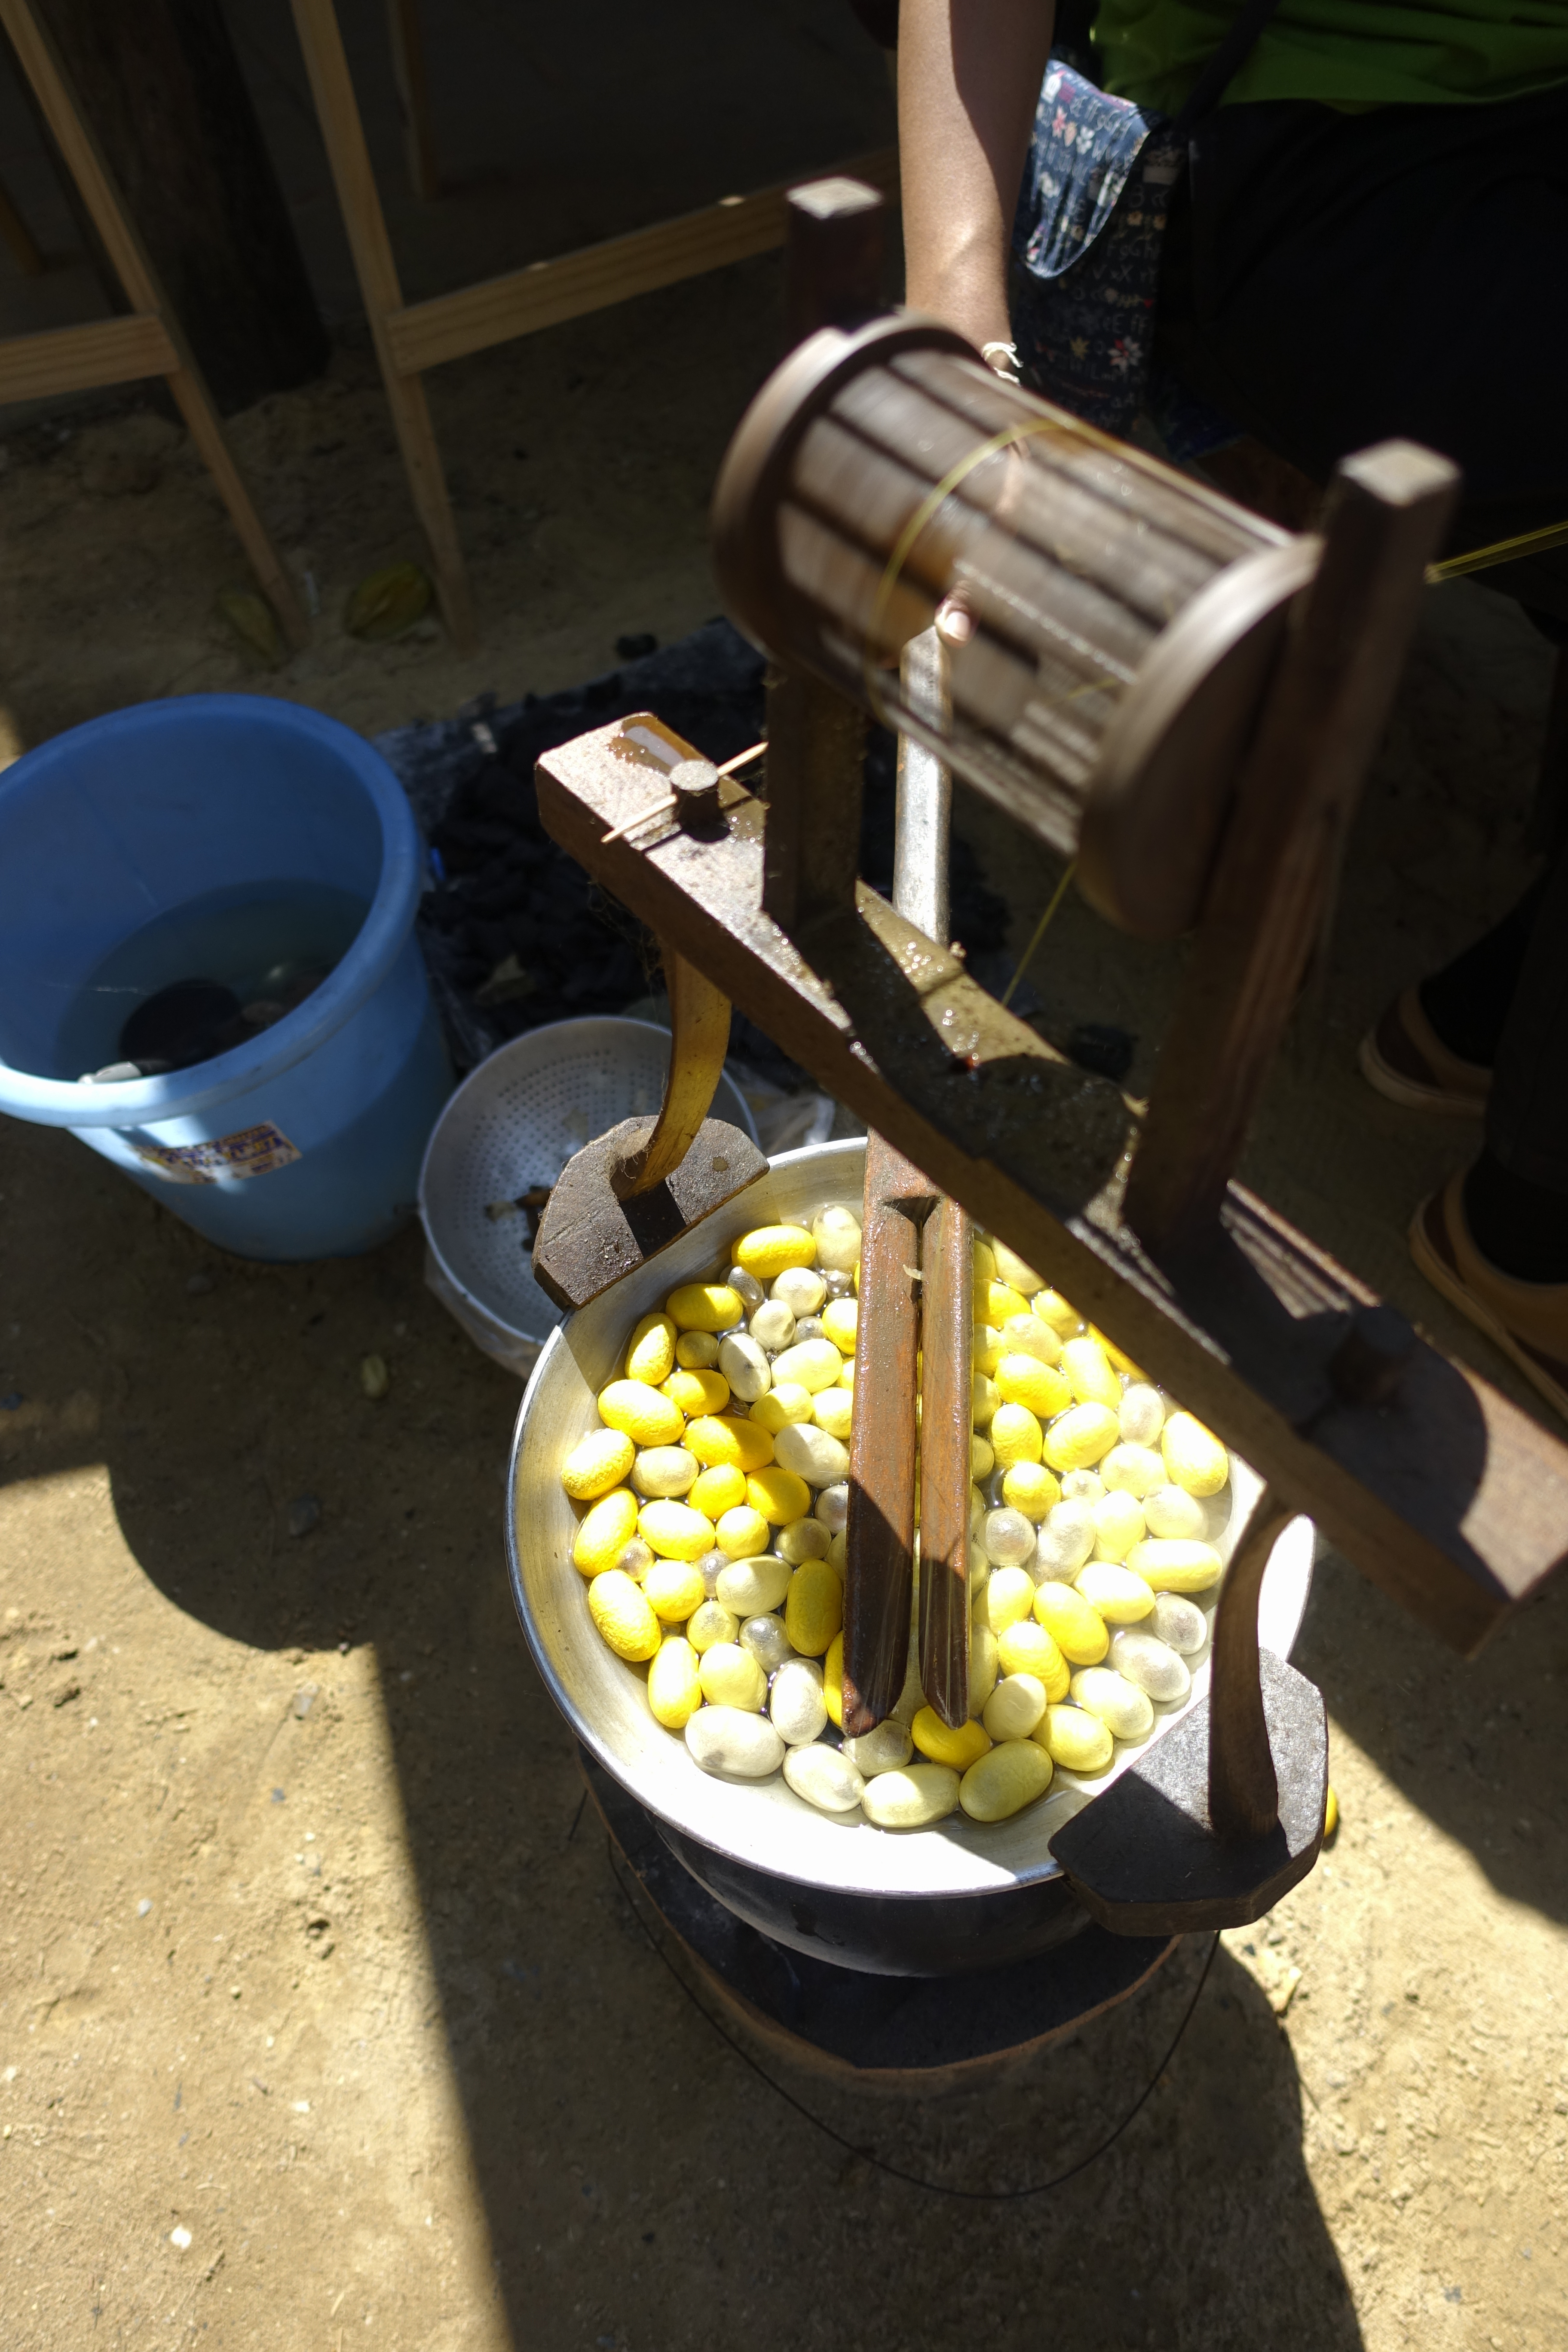 Boiling Silkworm Cocoons and Spinning Thread